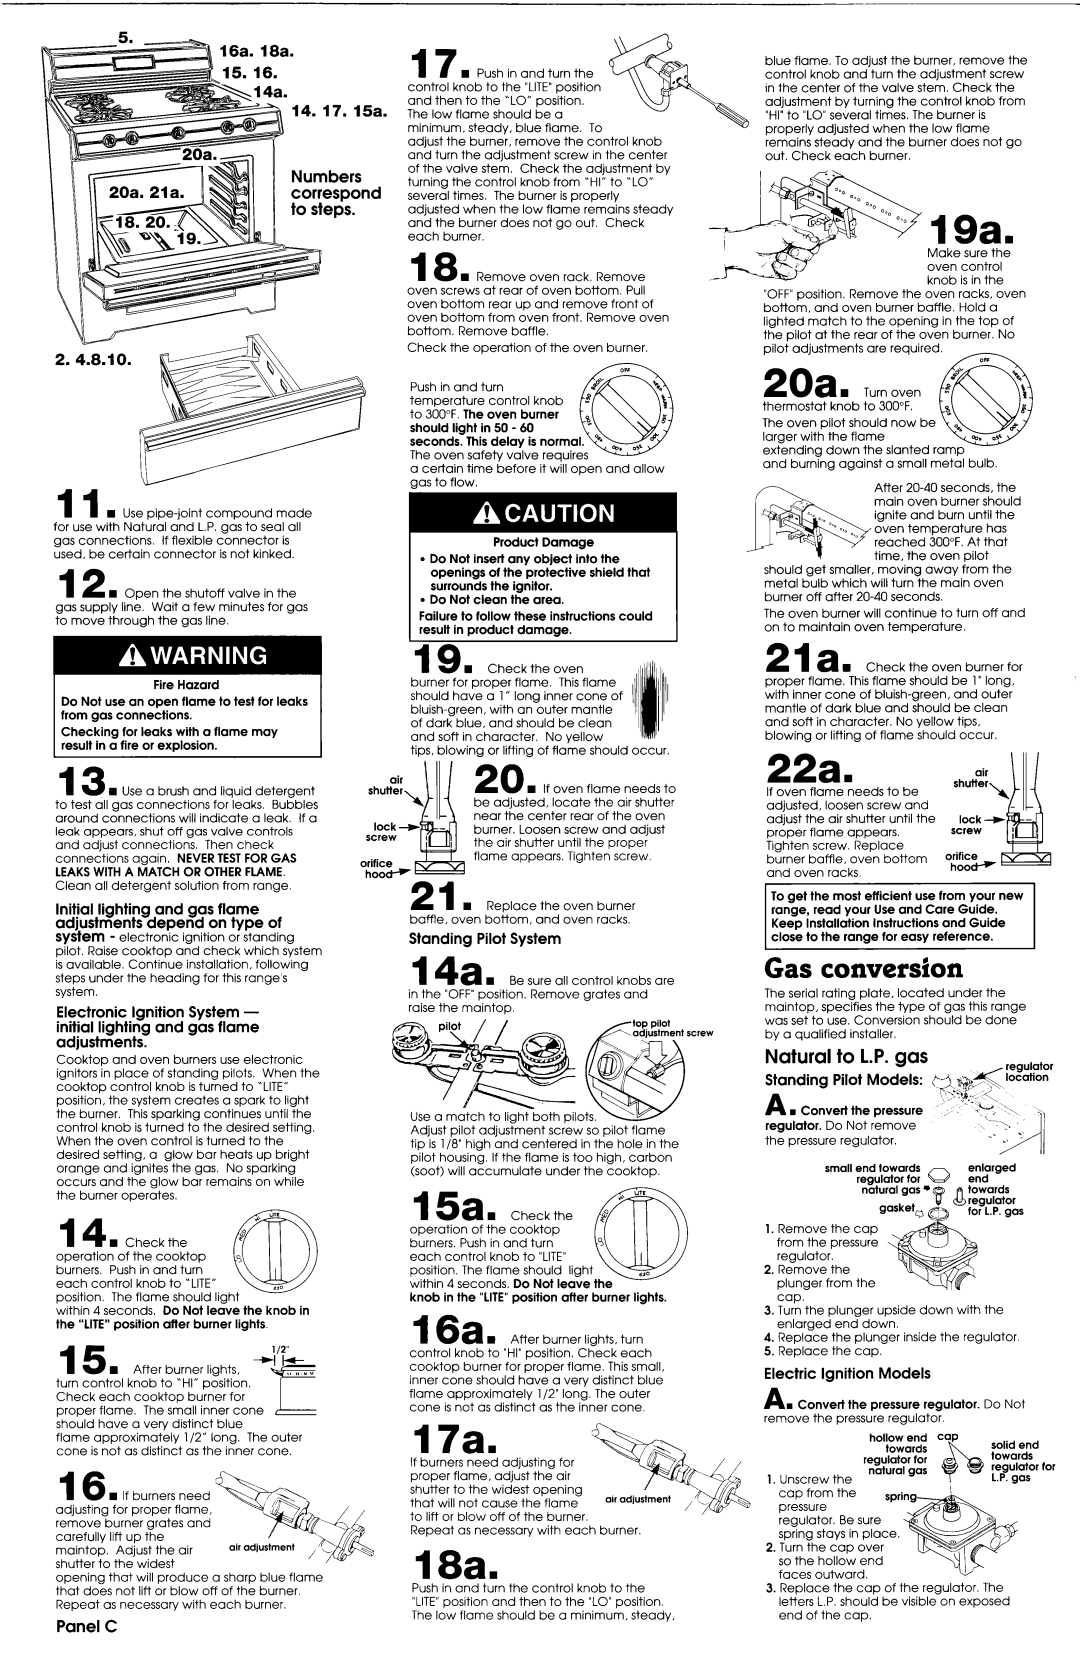 Whirlpool 30 installation instructions 15 n, 19 w, 15a n, Gas conversion, Natural, 14 n, kTf%, ‘ 9&‘ 